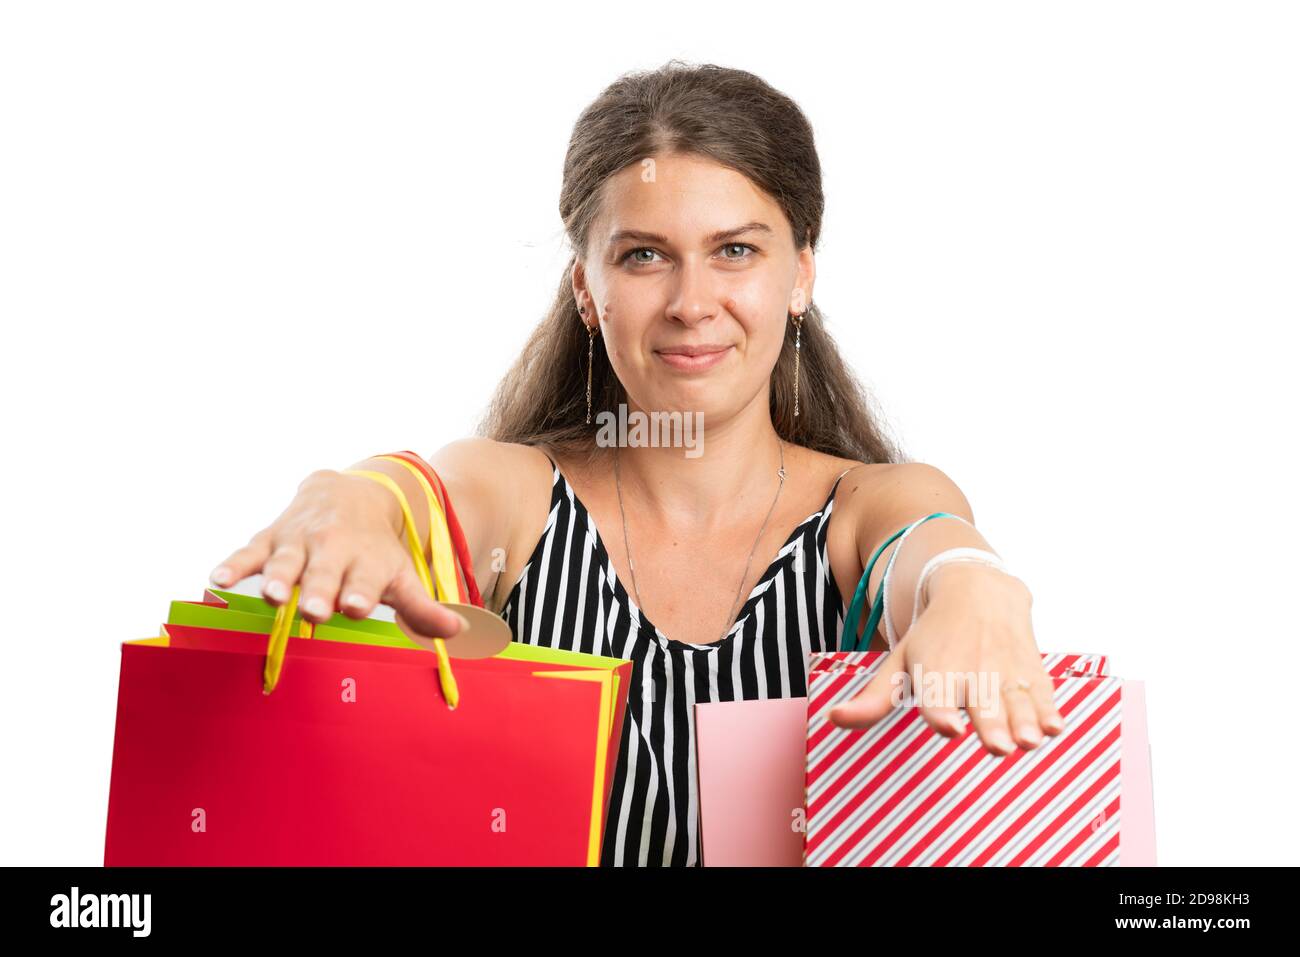 Shopaholic adult woman model showing bags full of colourful bags wearing modern fashionable casual summer attire as shopping concept close-up isolated Stock Photo